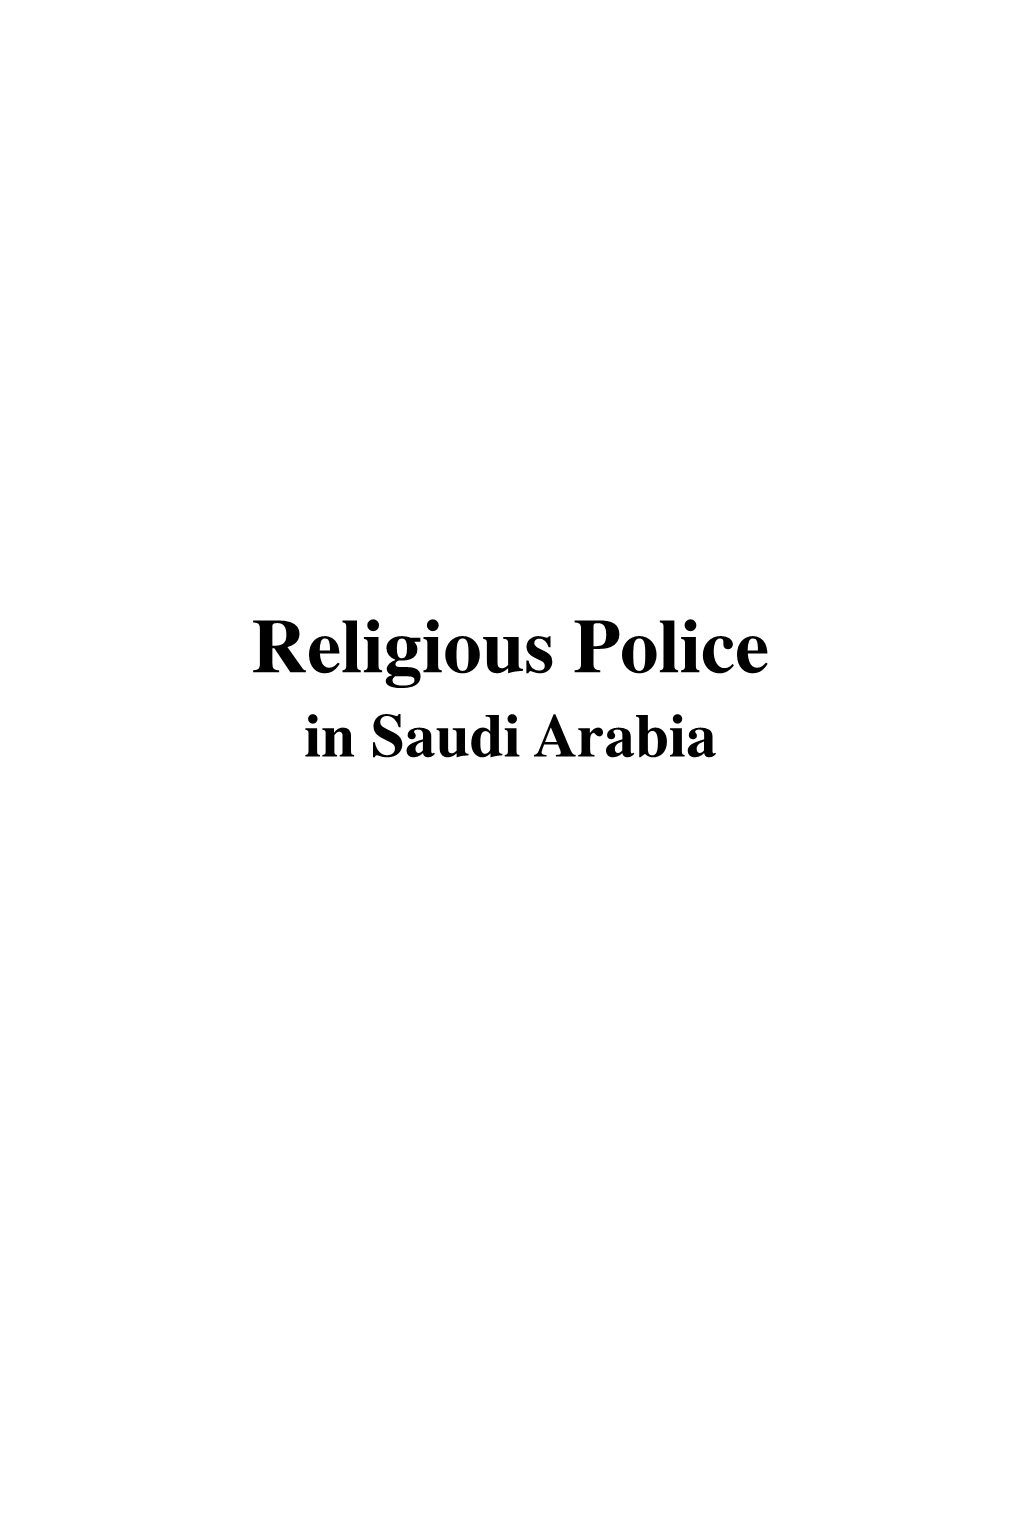 Religious Police in Saudi Arabia First Edition, 2008 Copyright Strictly Reserved for Publisher